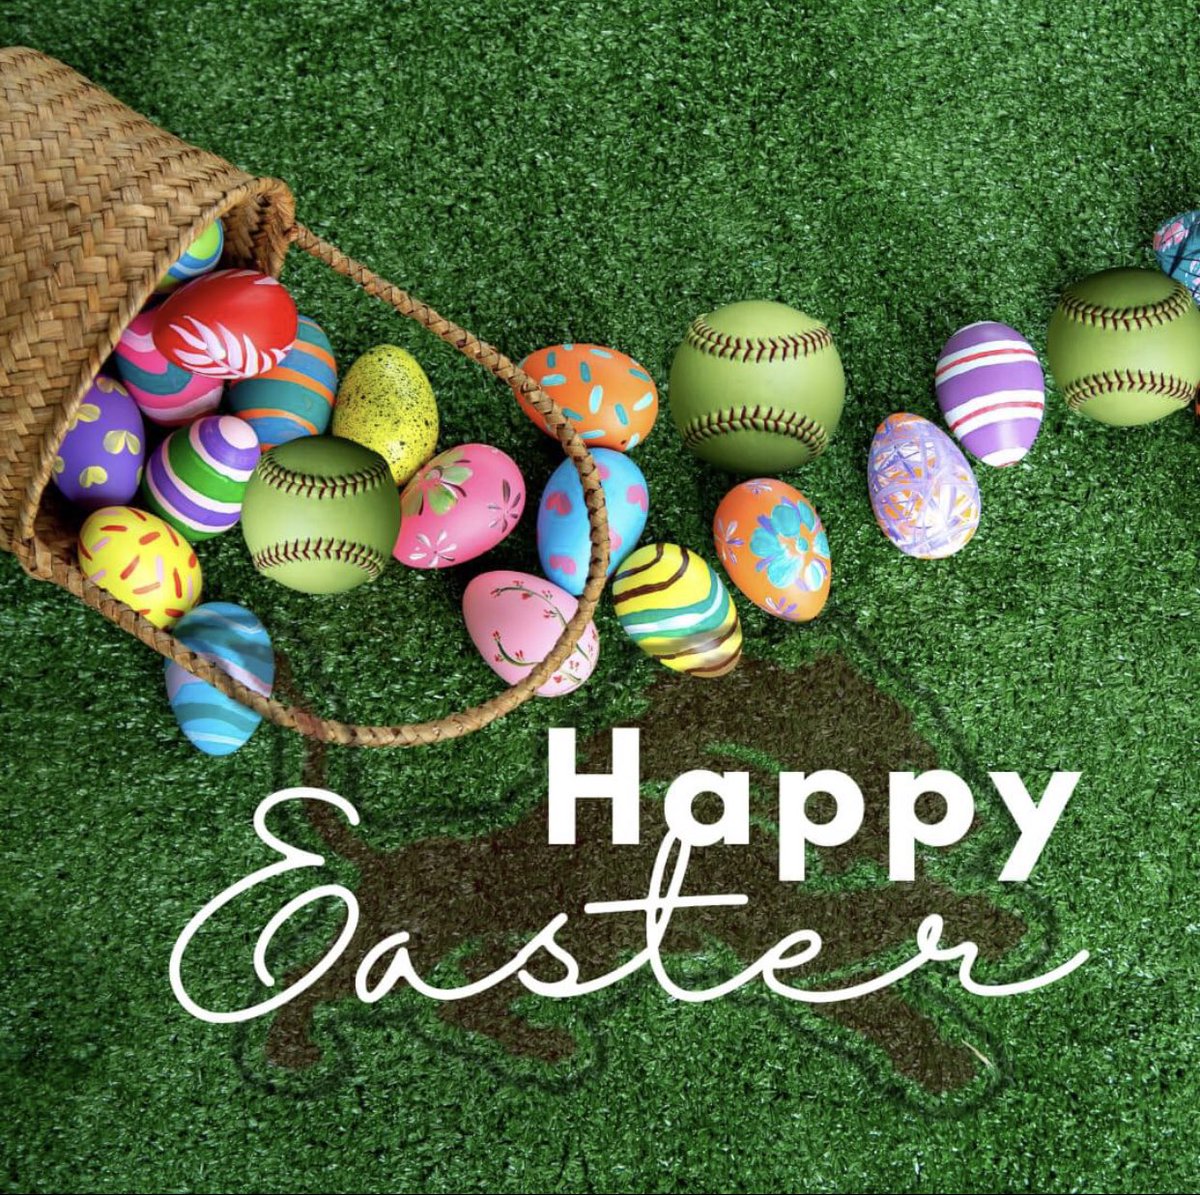 Our Lockhart Lions Softball Family would like to wish you a very Happy Easter!